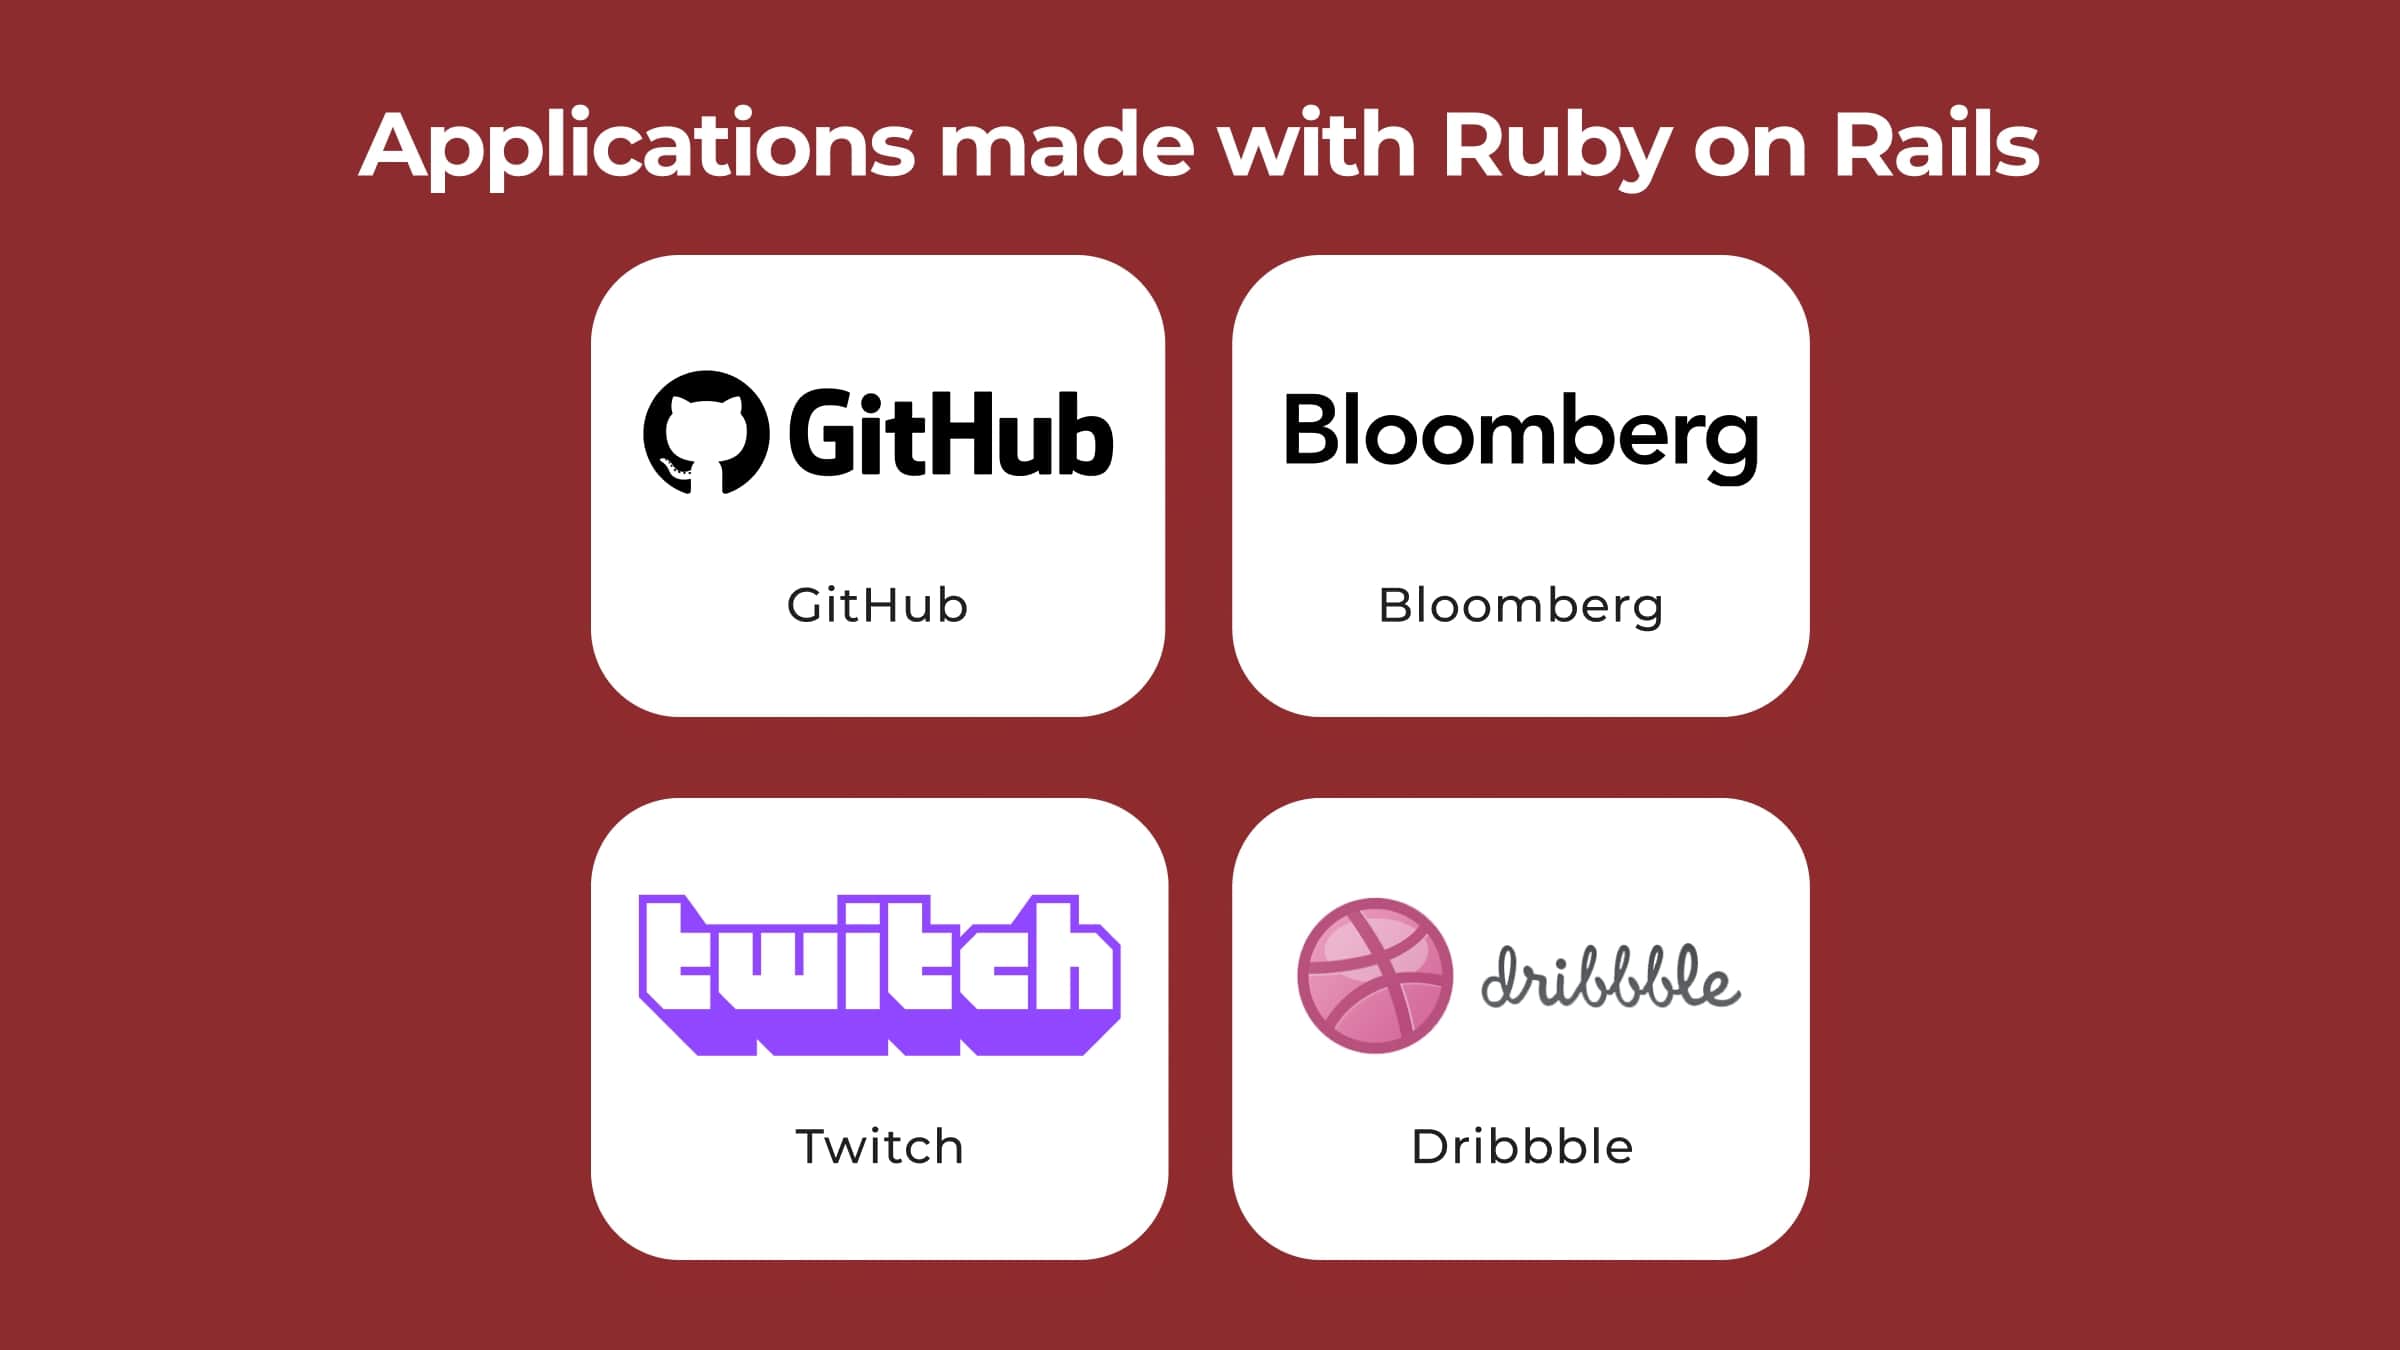 Applications made with Ruby on Rails